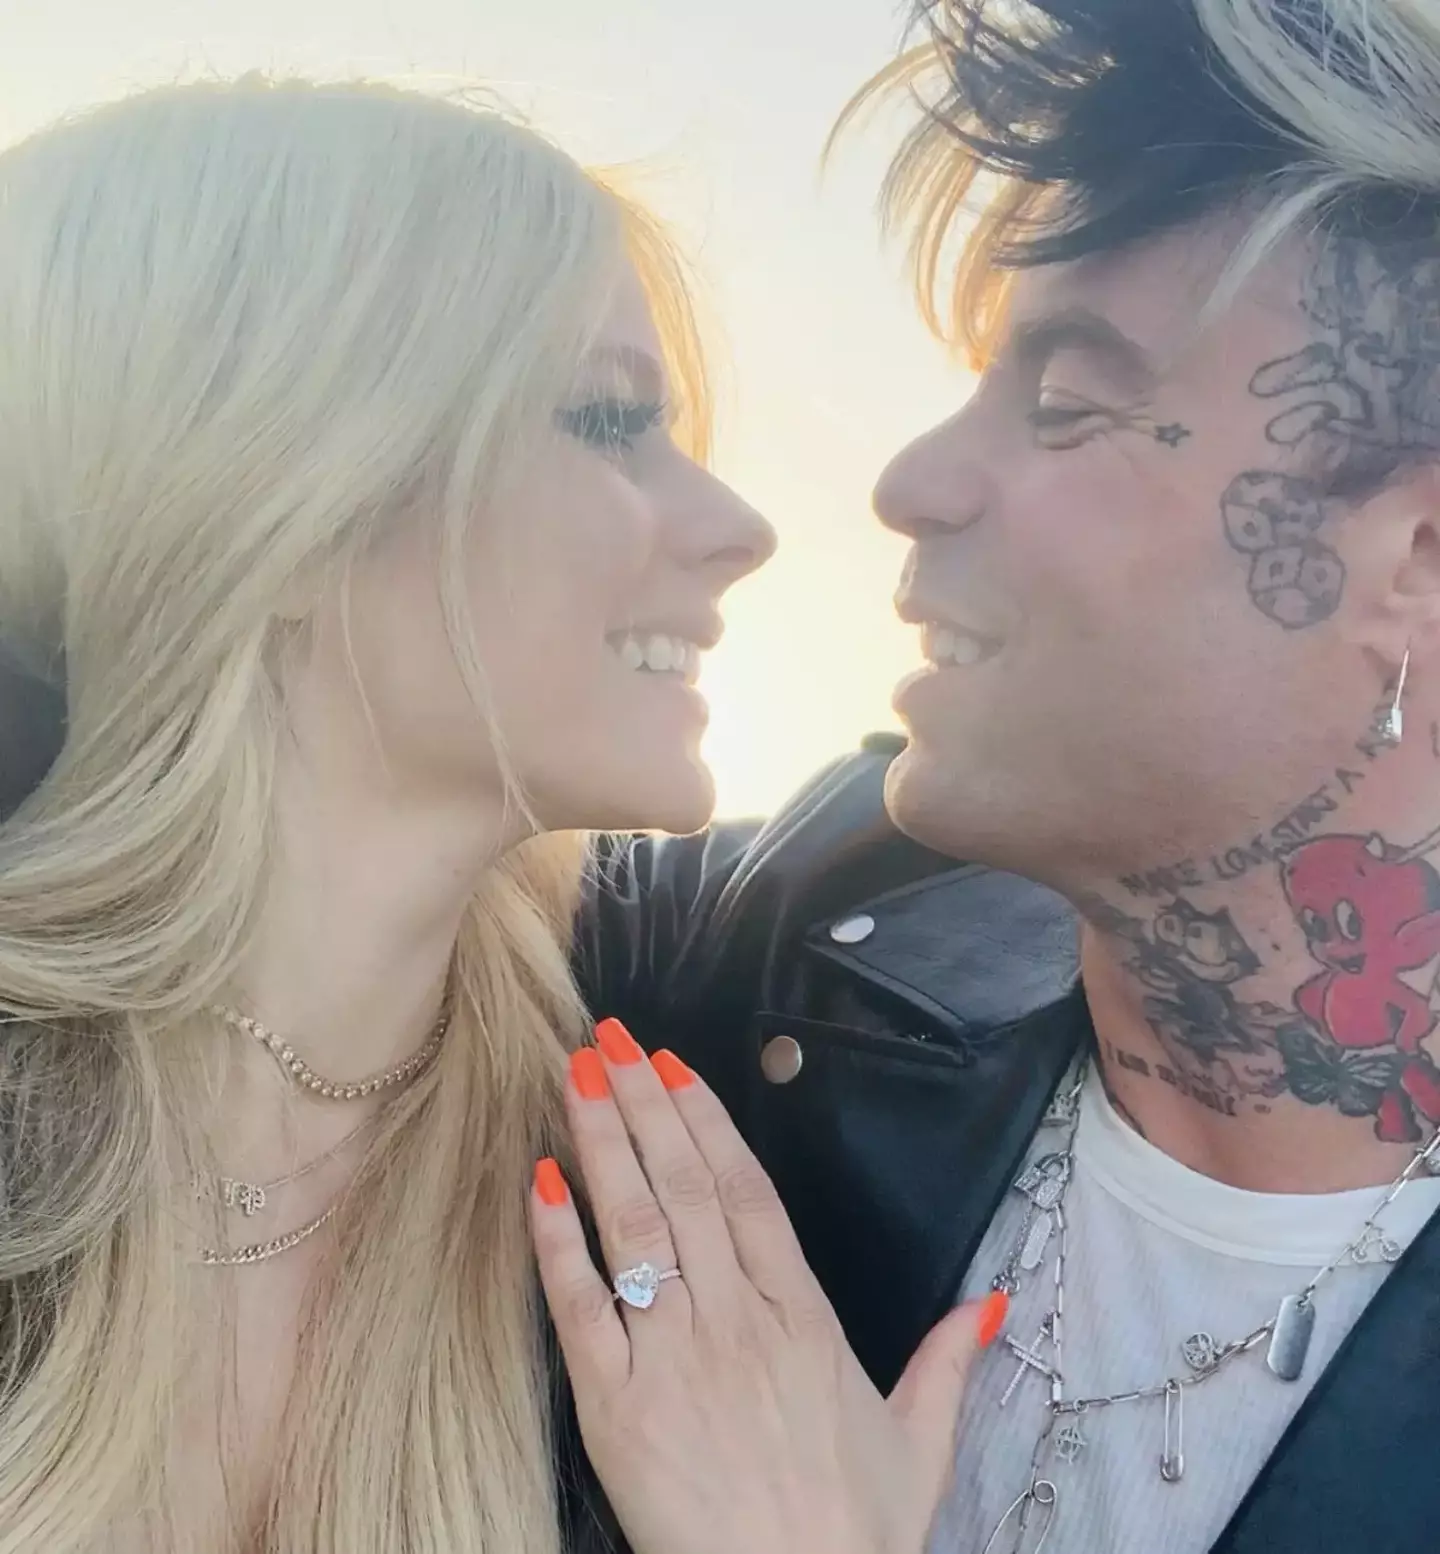 Avril and Mod Sun announced their engagement last year.